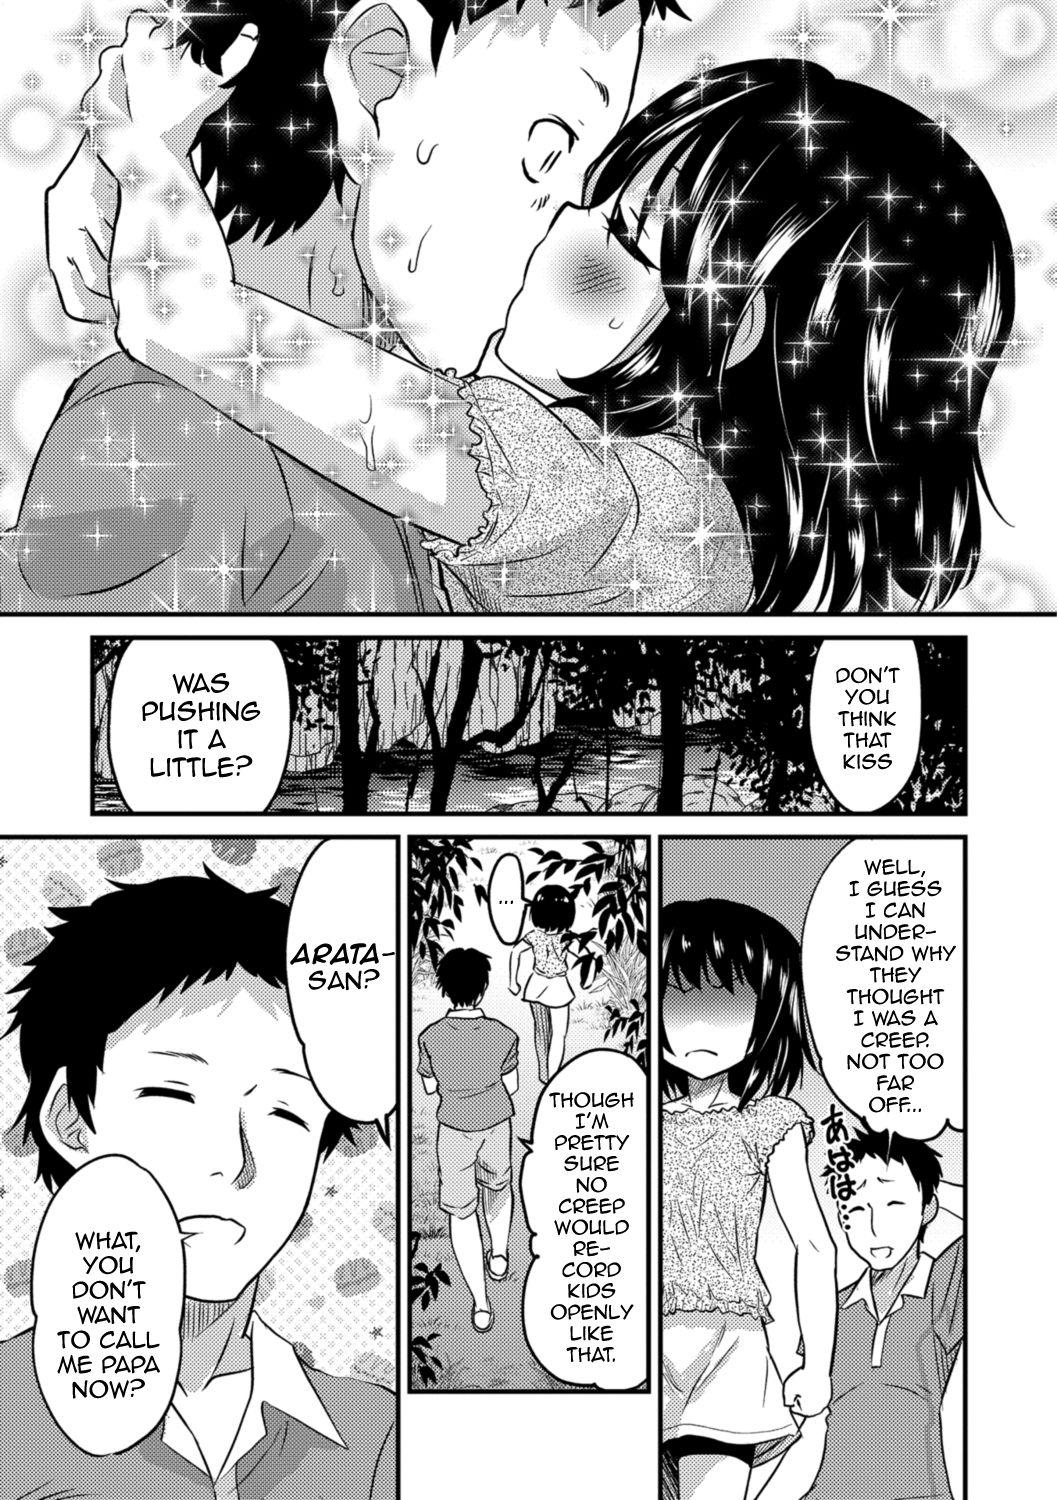 Kimi no Tsurego ni Koishiteru. 2 | I'm in Love With Your Child From a Previous Marriage. 2 4